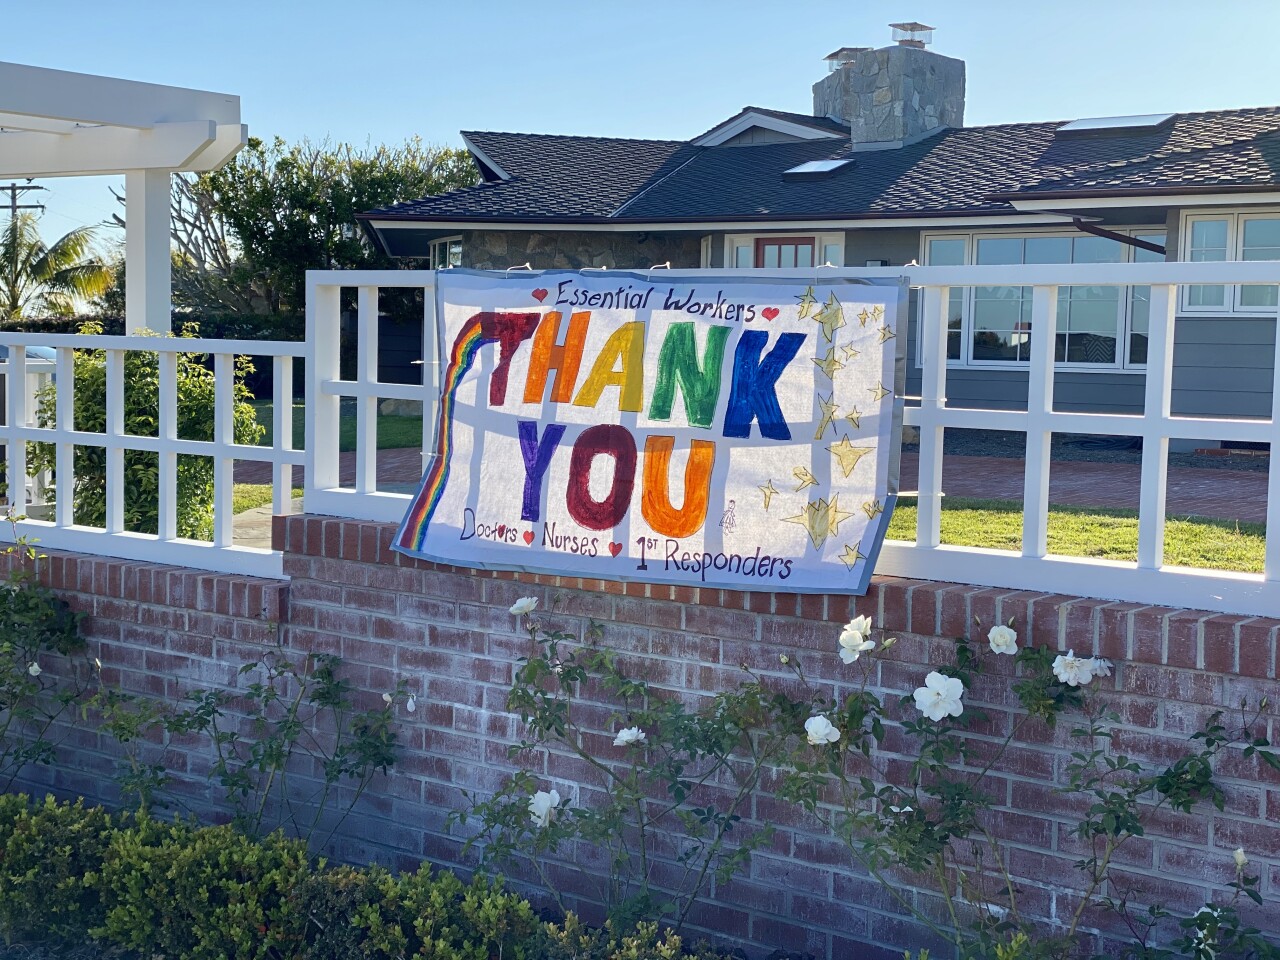 A sign on a fence along La Jolla Mesa Drive reads "Essential workers, THANK YOU, doctors, nurses, 1st responders."